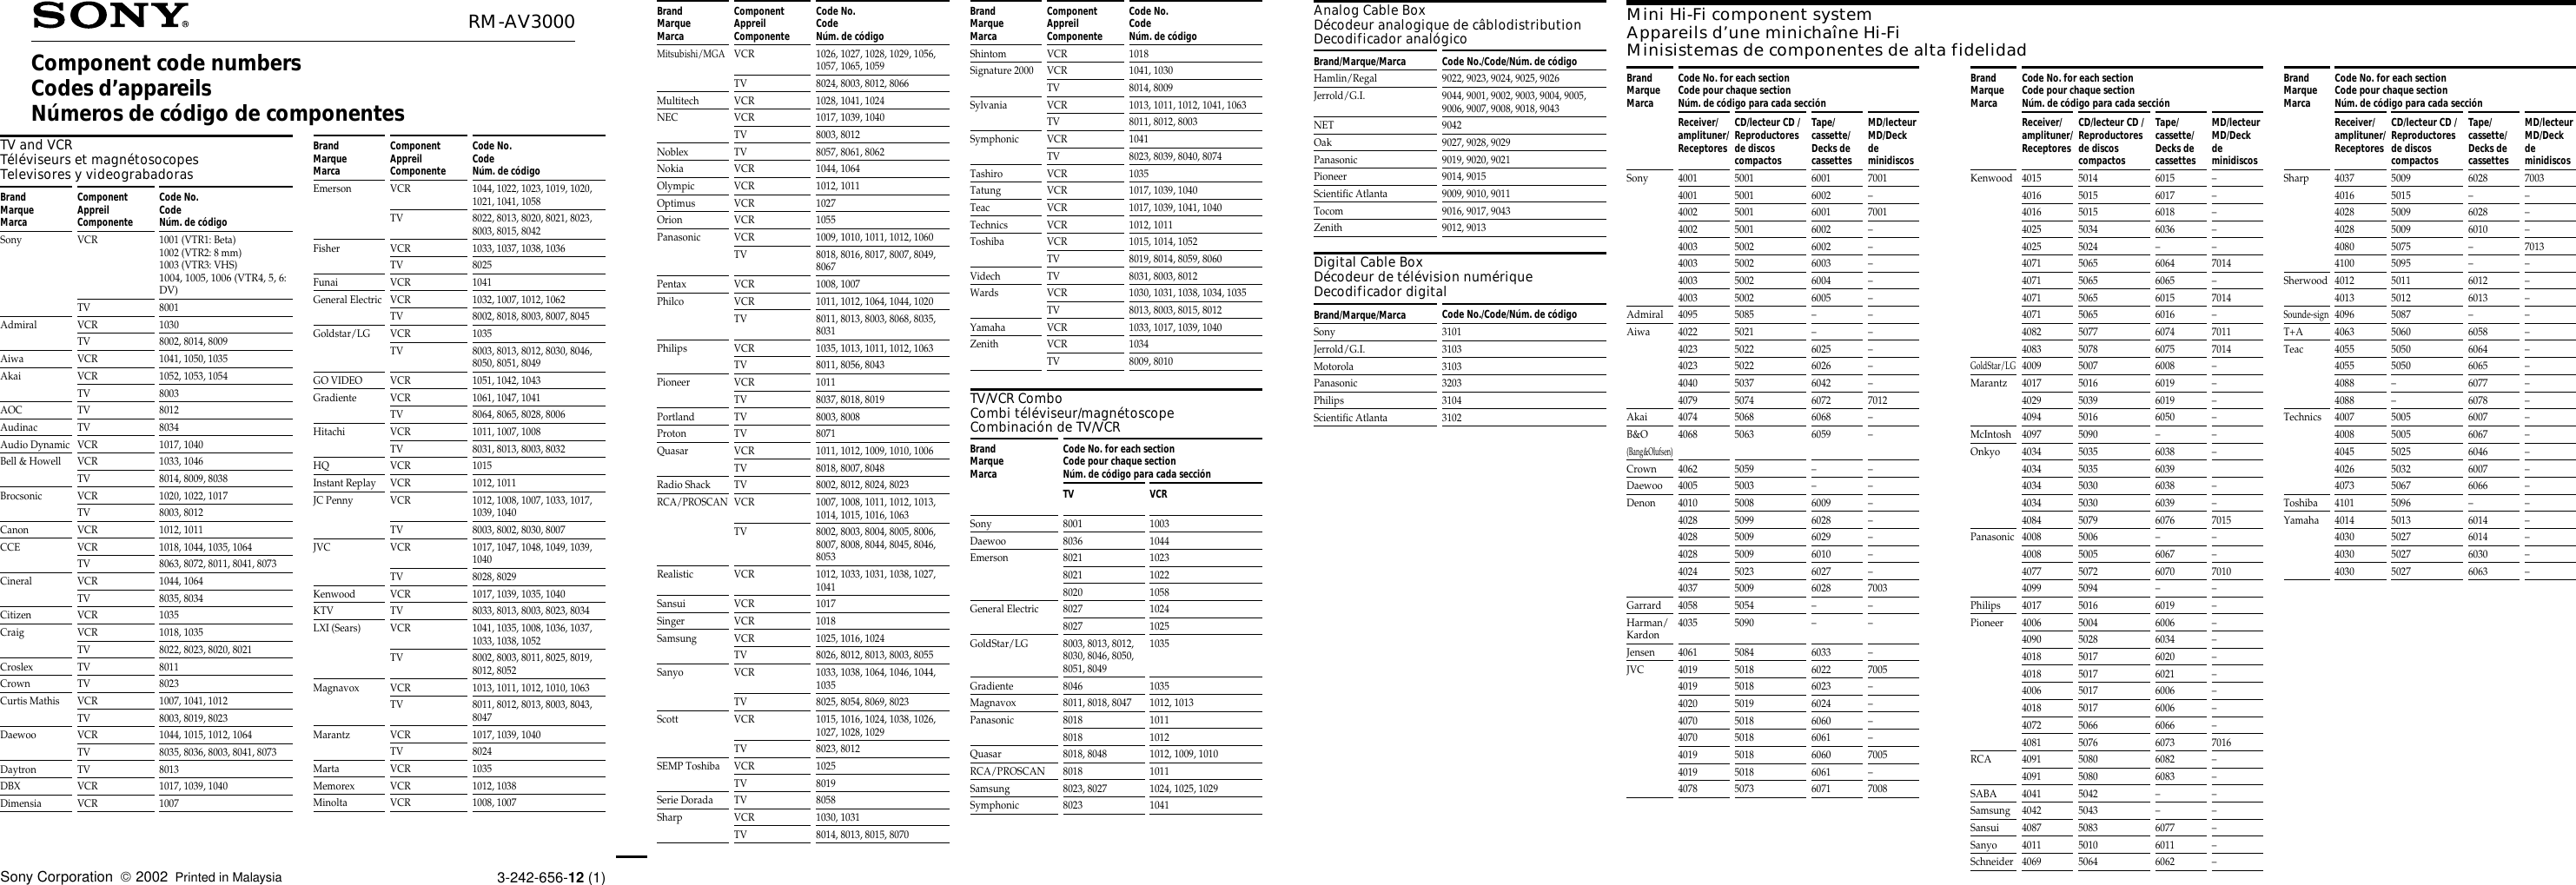 Page 1 of 2 - Sony RM-AV3000 User Manual Component Code Numbers RMAV3000 Codes